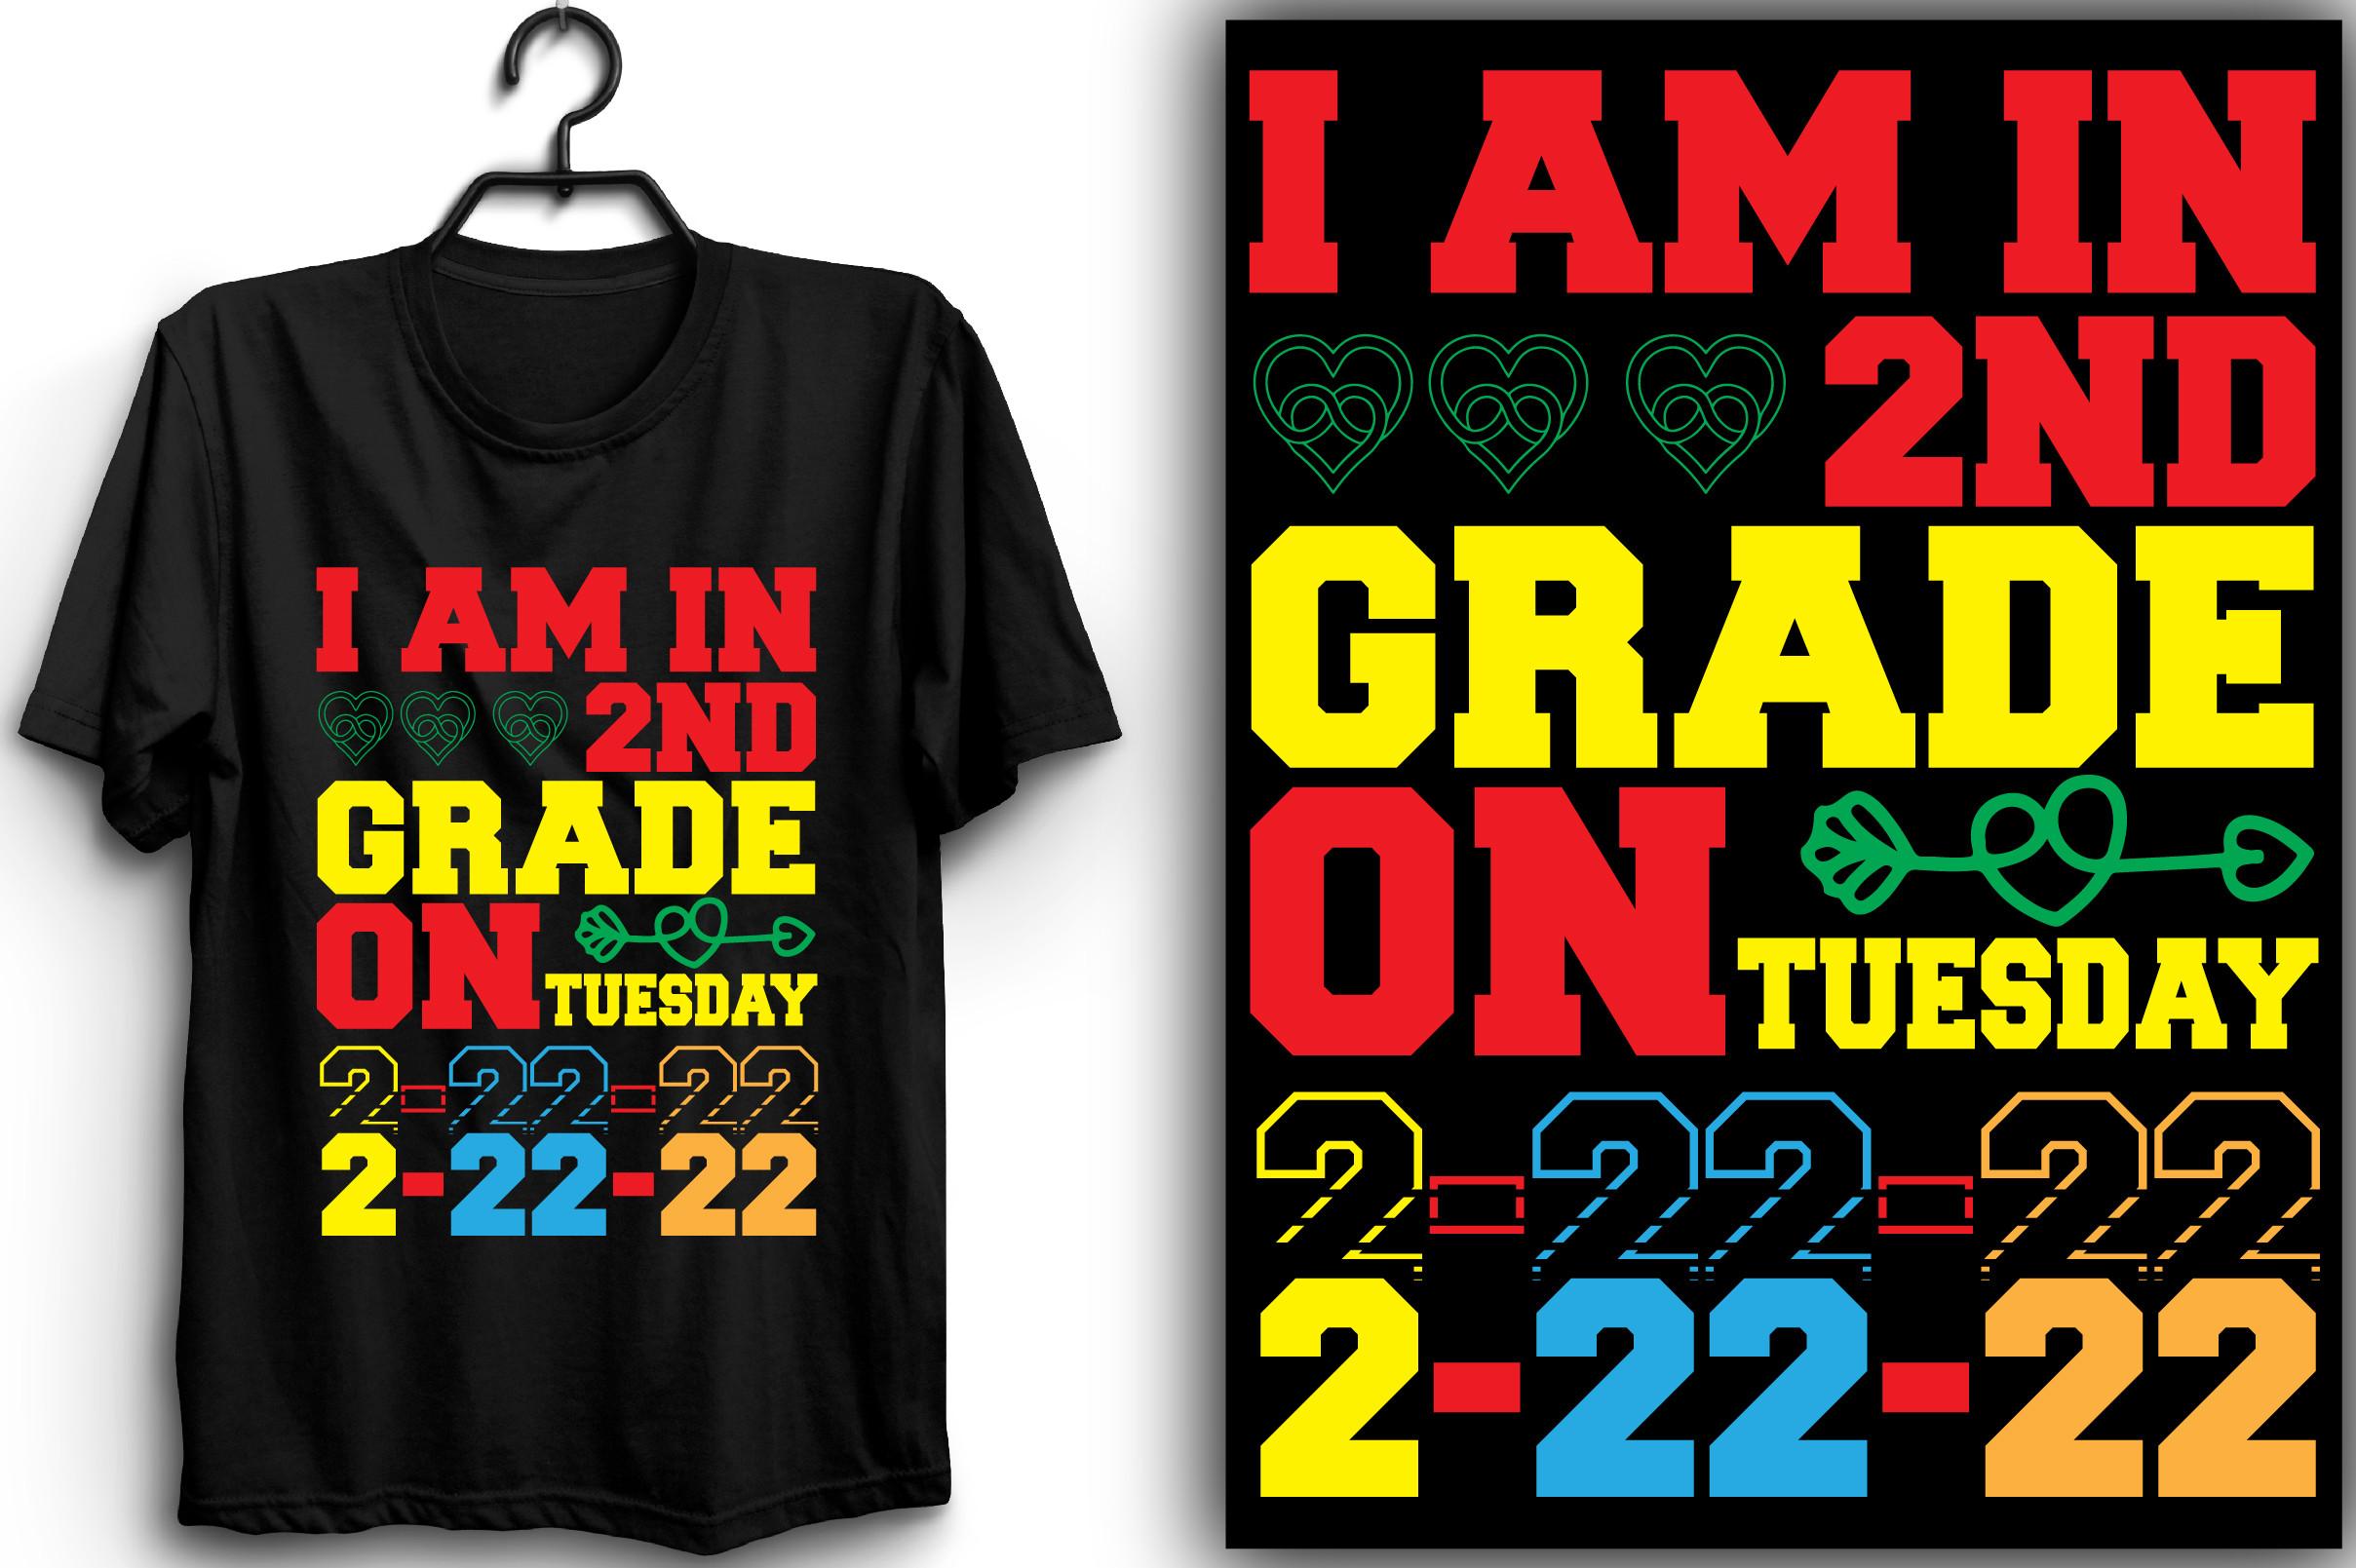 I AM in 2ND GRADE on TUESDAY 2-22-22